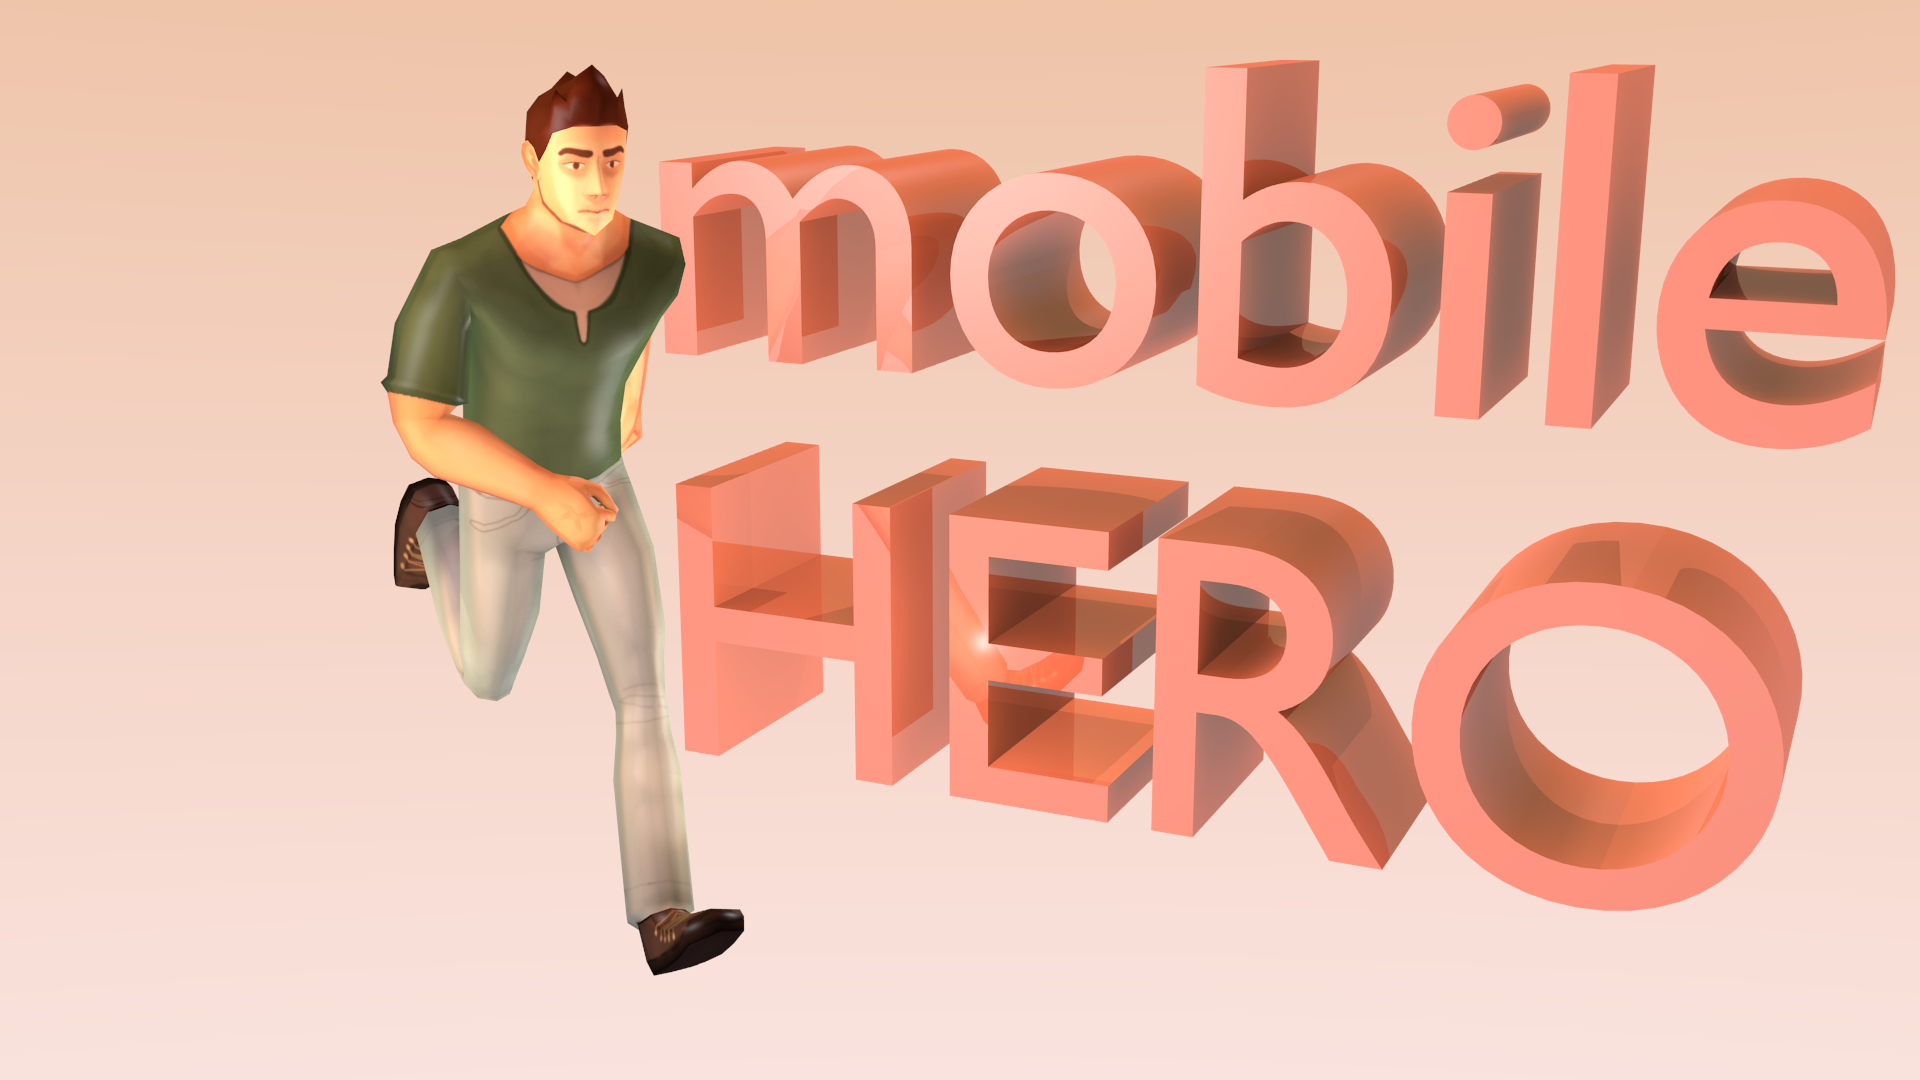 Mobile Hero -with 2.5D Style Animations